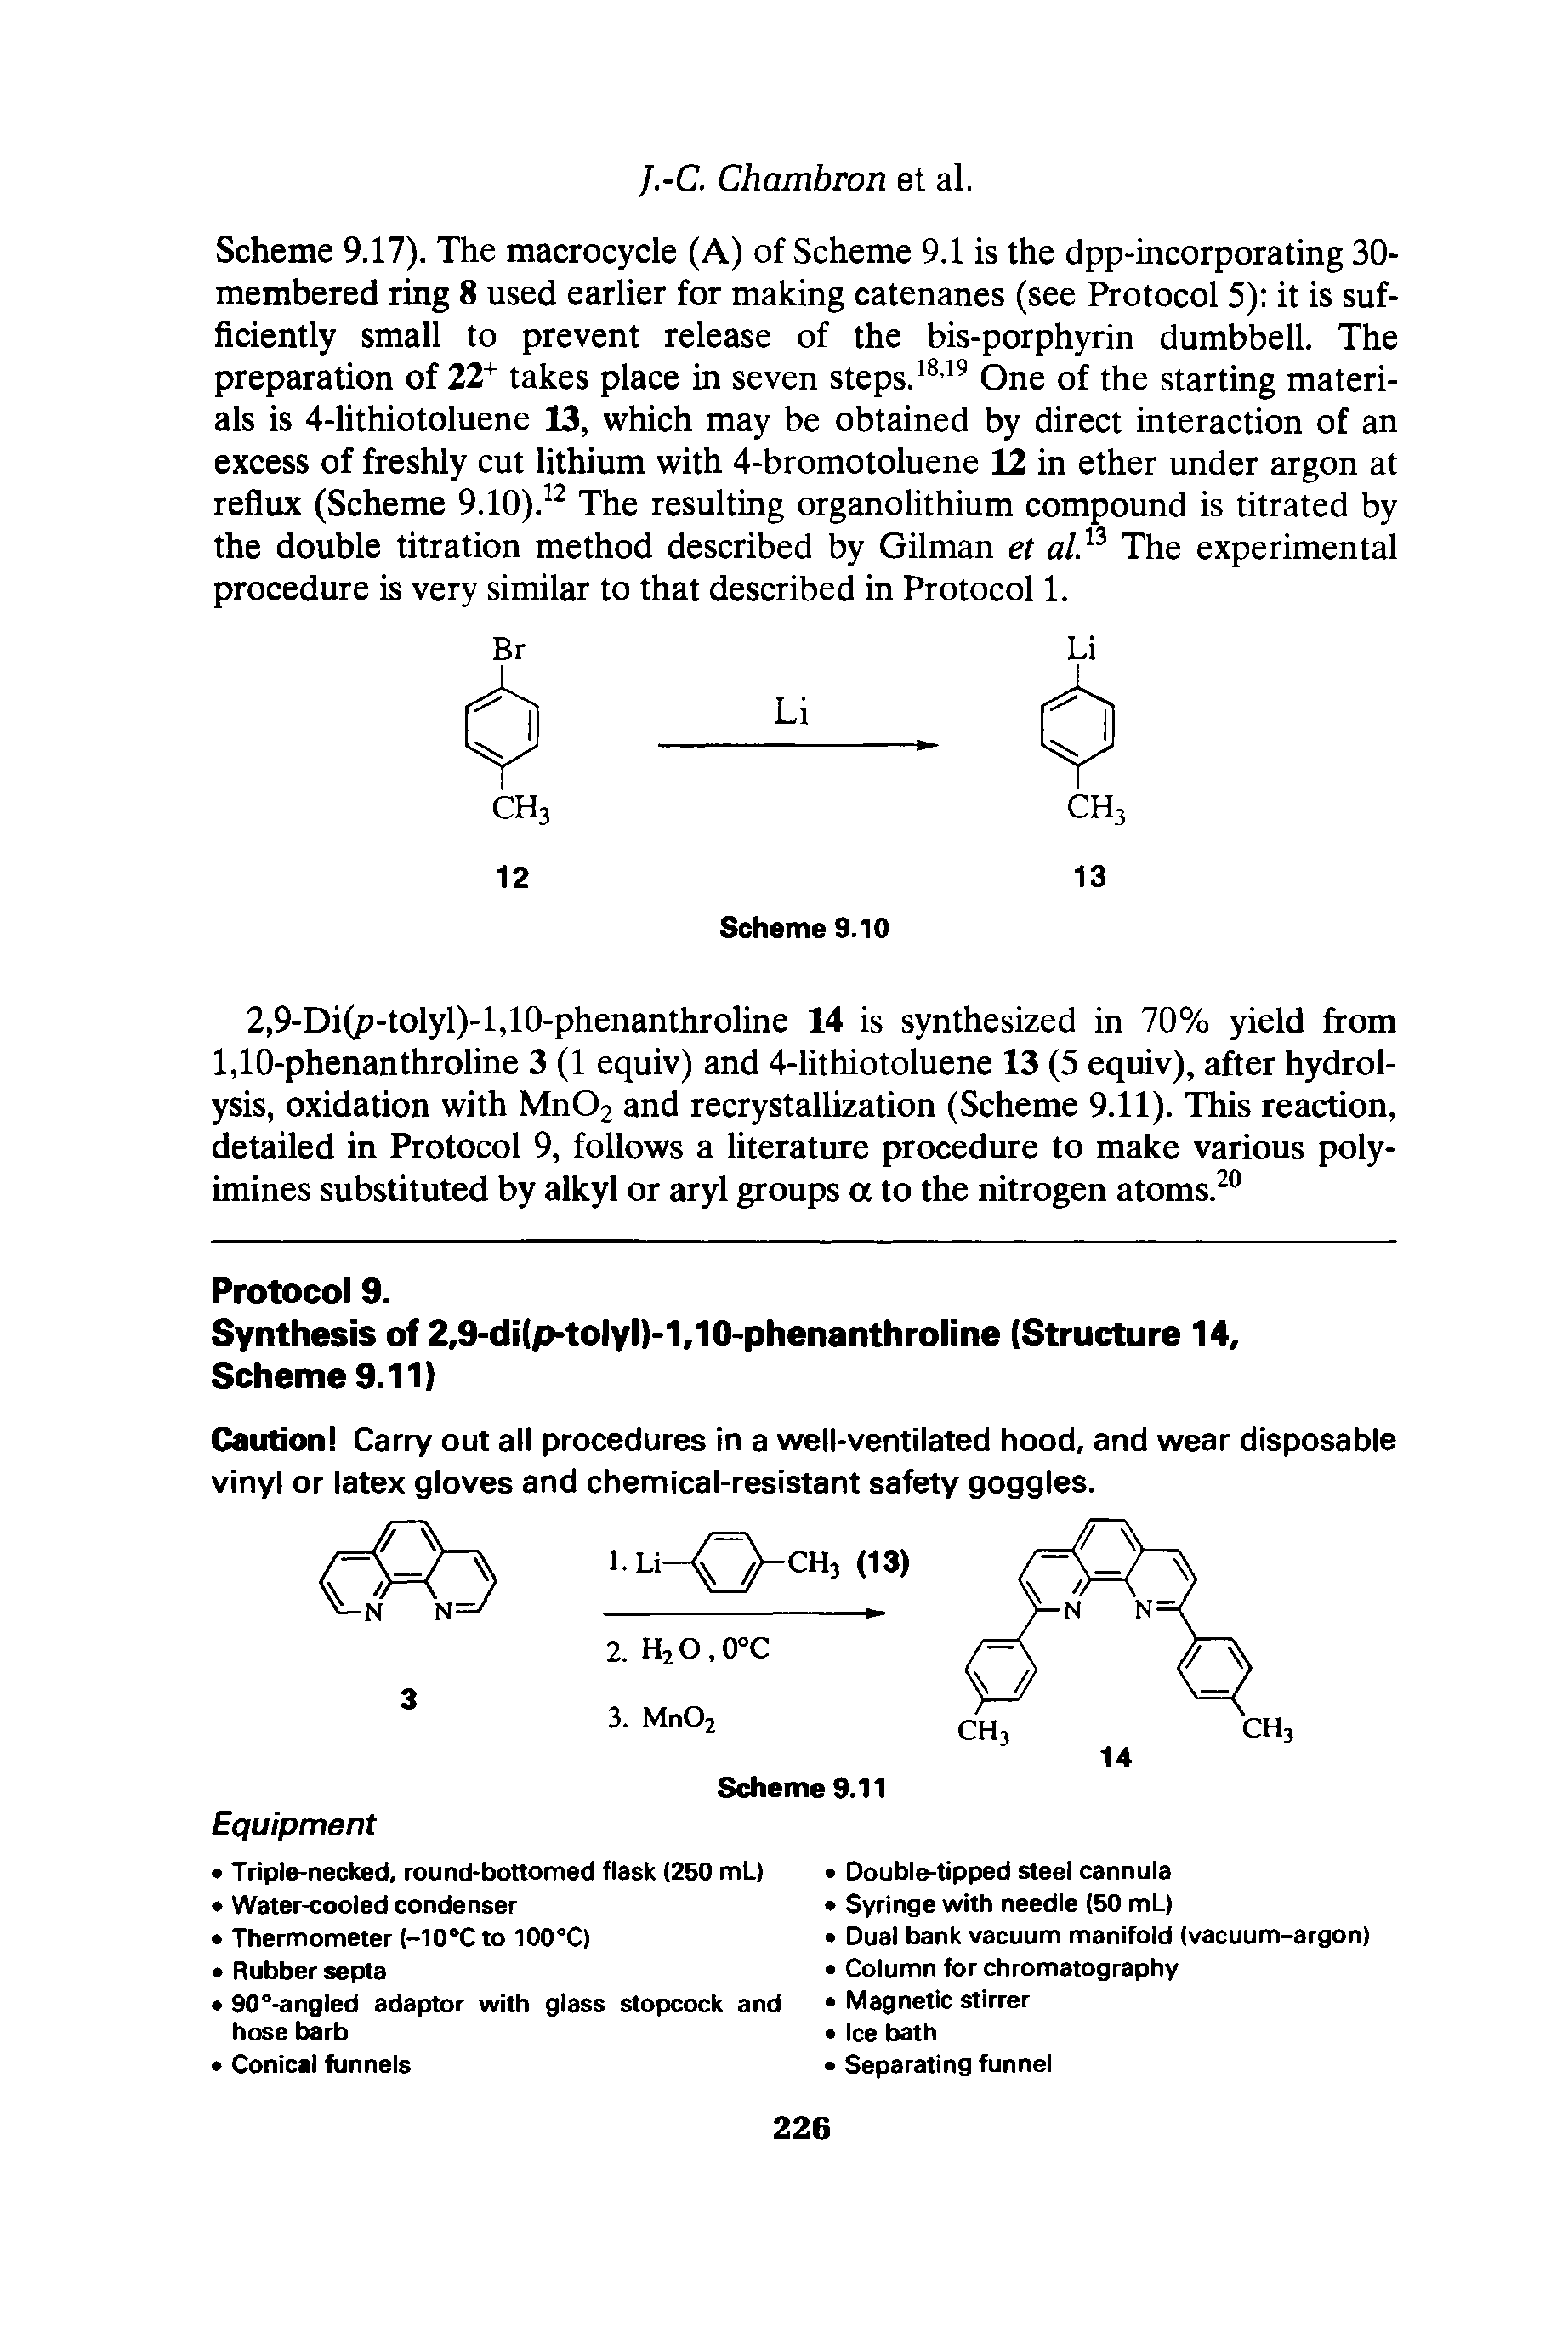 Scheme 9.17). The macrocycle (A) of Scheme 9.1 is the dpp-incorporating 30-membered ring 8 used earlier for making catenanes (see Protocol 5) it is sufficiently small to prevent release of the bis-porphyrin dumbbell. The preparation of 22+ takes place in seven steps.1819 One of the starting materials is 4-lithiotoluene 13, which may be obtained by direct interaction of an excess of freshly cut lithium with 4-bromotoluene 12 in ether under argon at reflux (Scheme 9.10).12 The resulting organolithium compound is titrated by the double titration method described by Gilman et alP The experimental procedure is very similar to that described in Protocol 1.